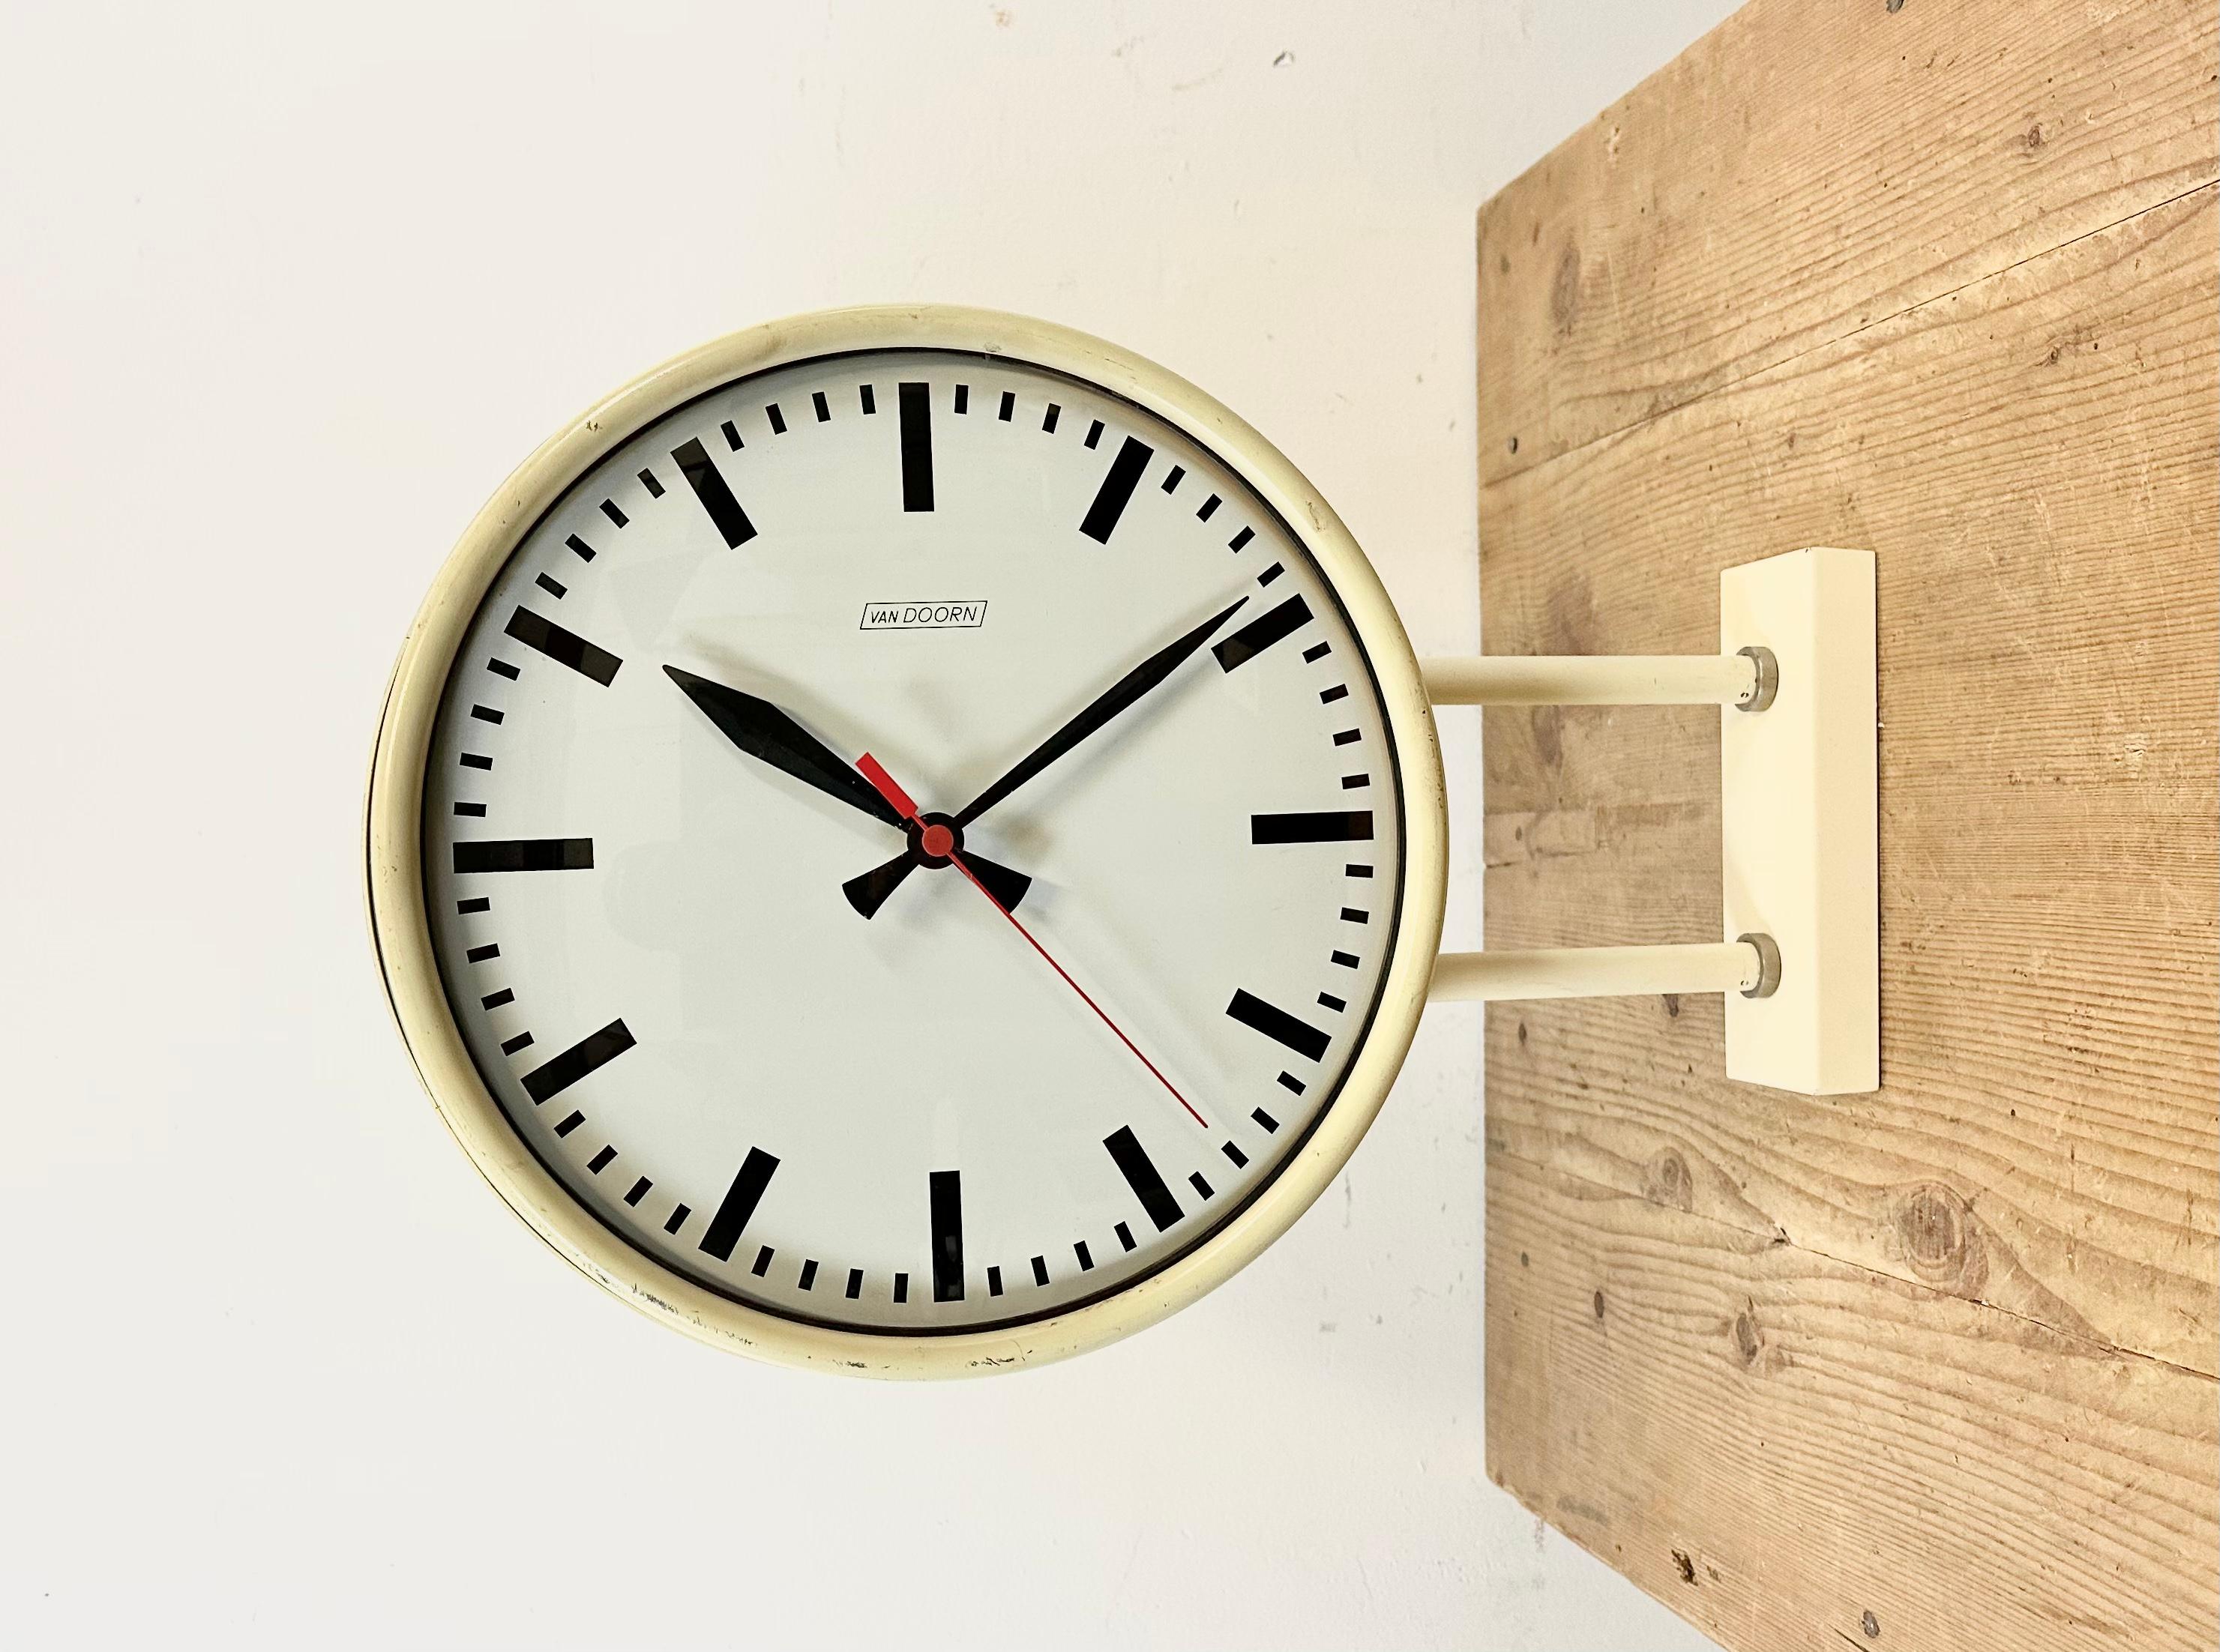 This double sided wall clock was produced by Van Doorn in Netherlands during the 1960s. It features a beige iron body, an iron dials, an aluminum hands and a convex clear glass covers. The piece has been converted into a battery-powered clockwork